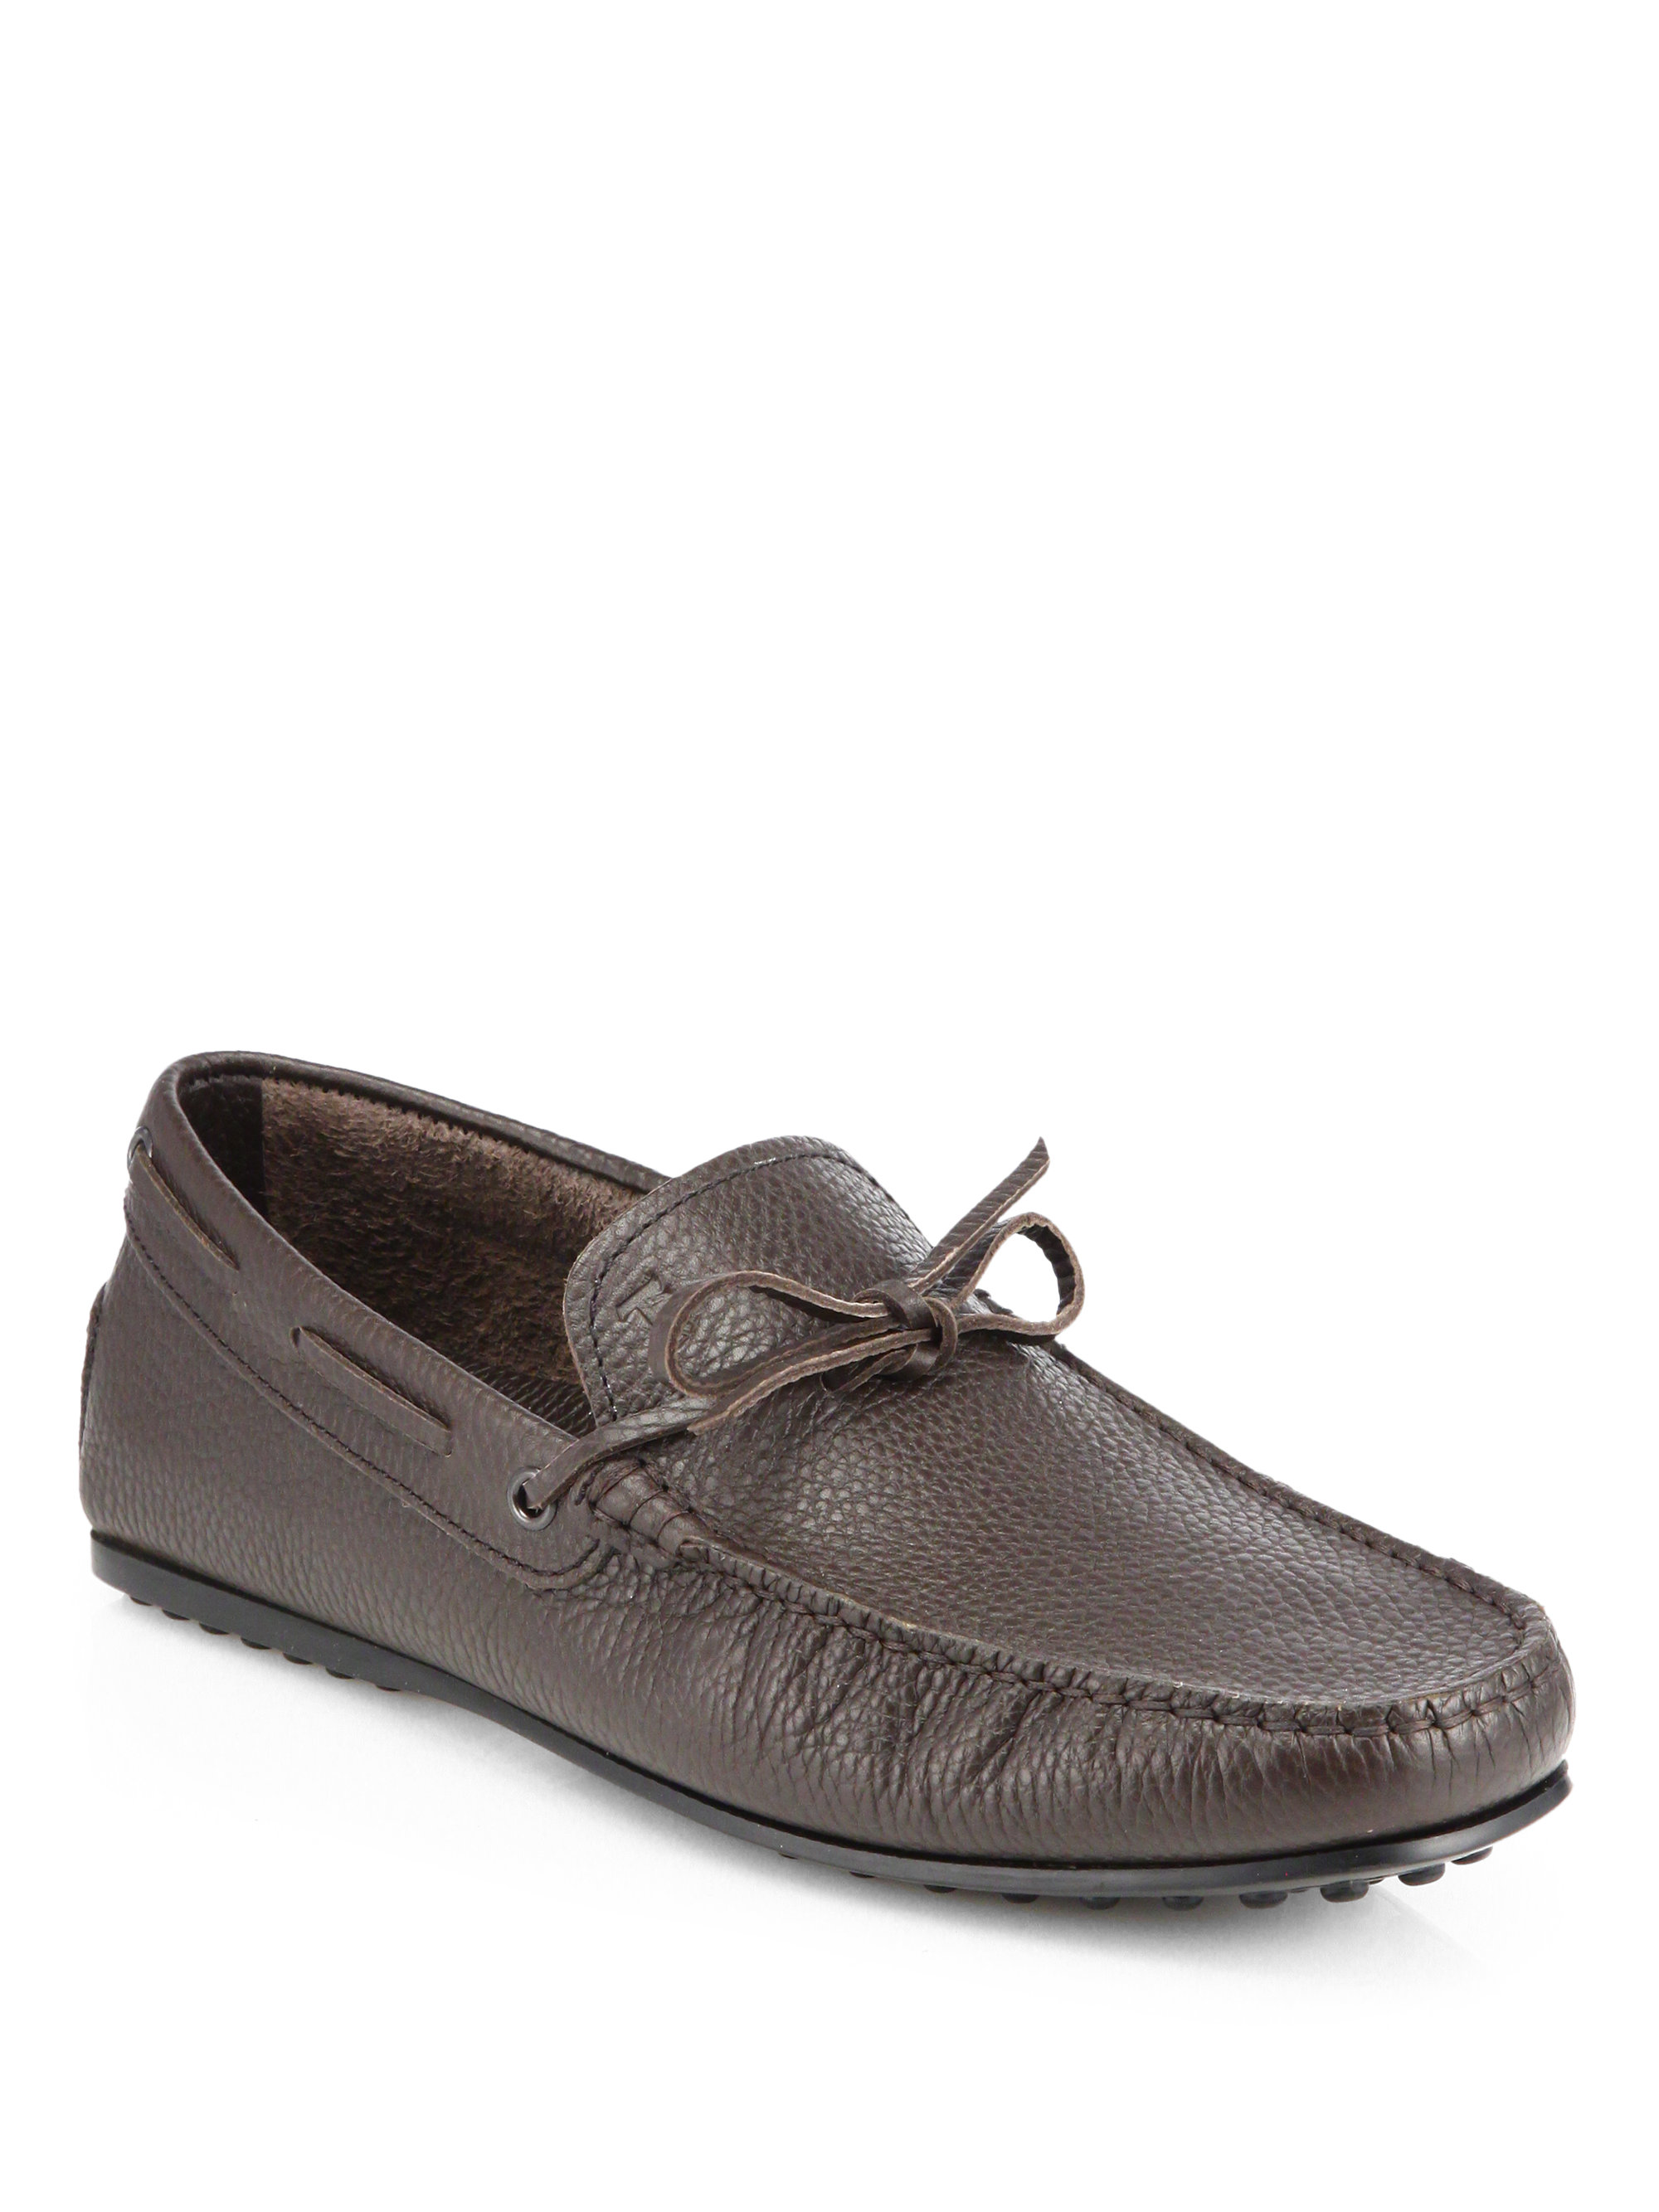 Tod's Laccetto City Gommino Moccasins in Coffee (Brown) for Men - Lyst